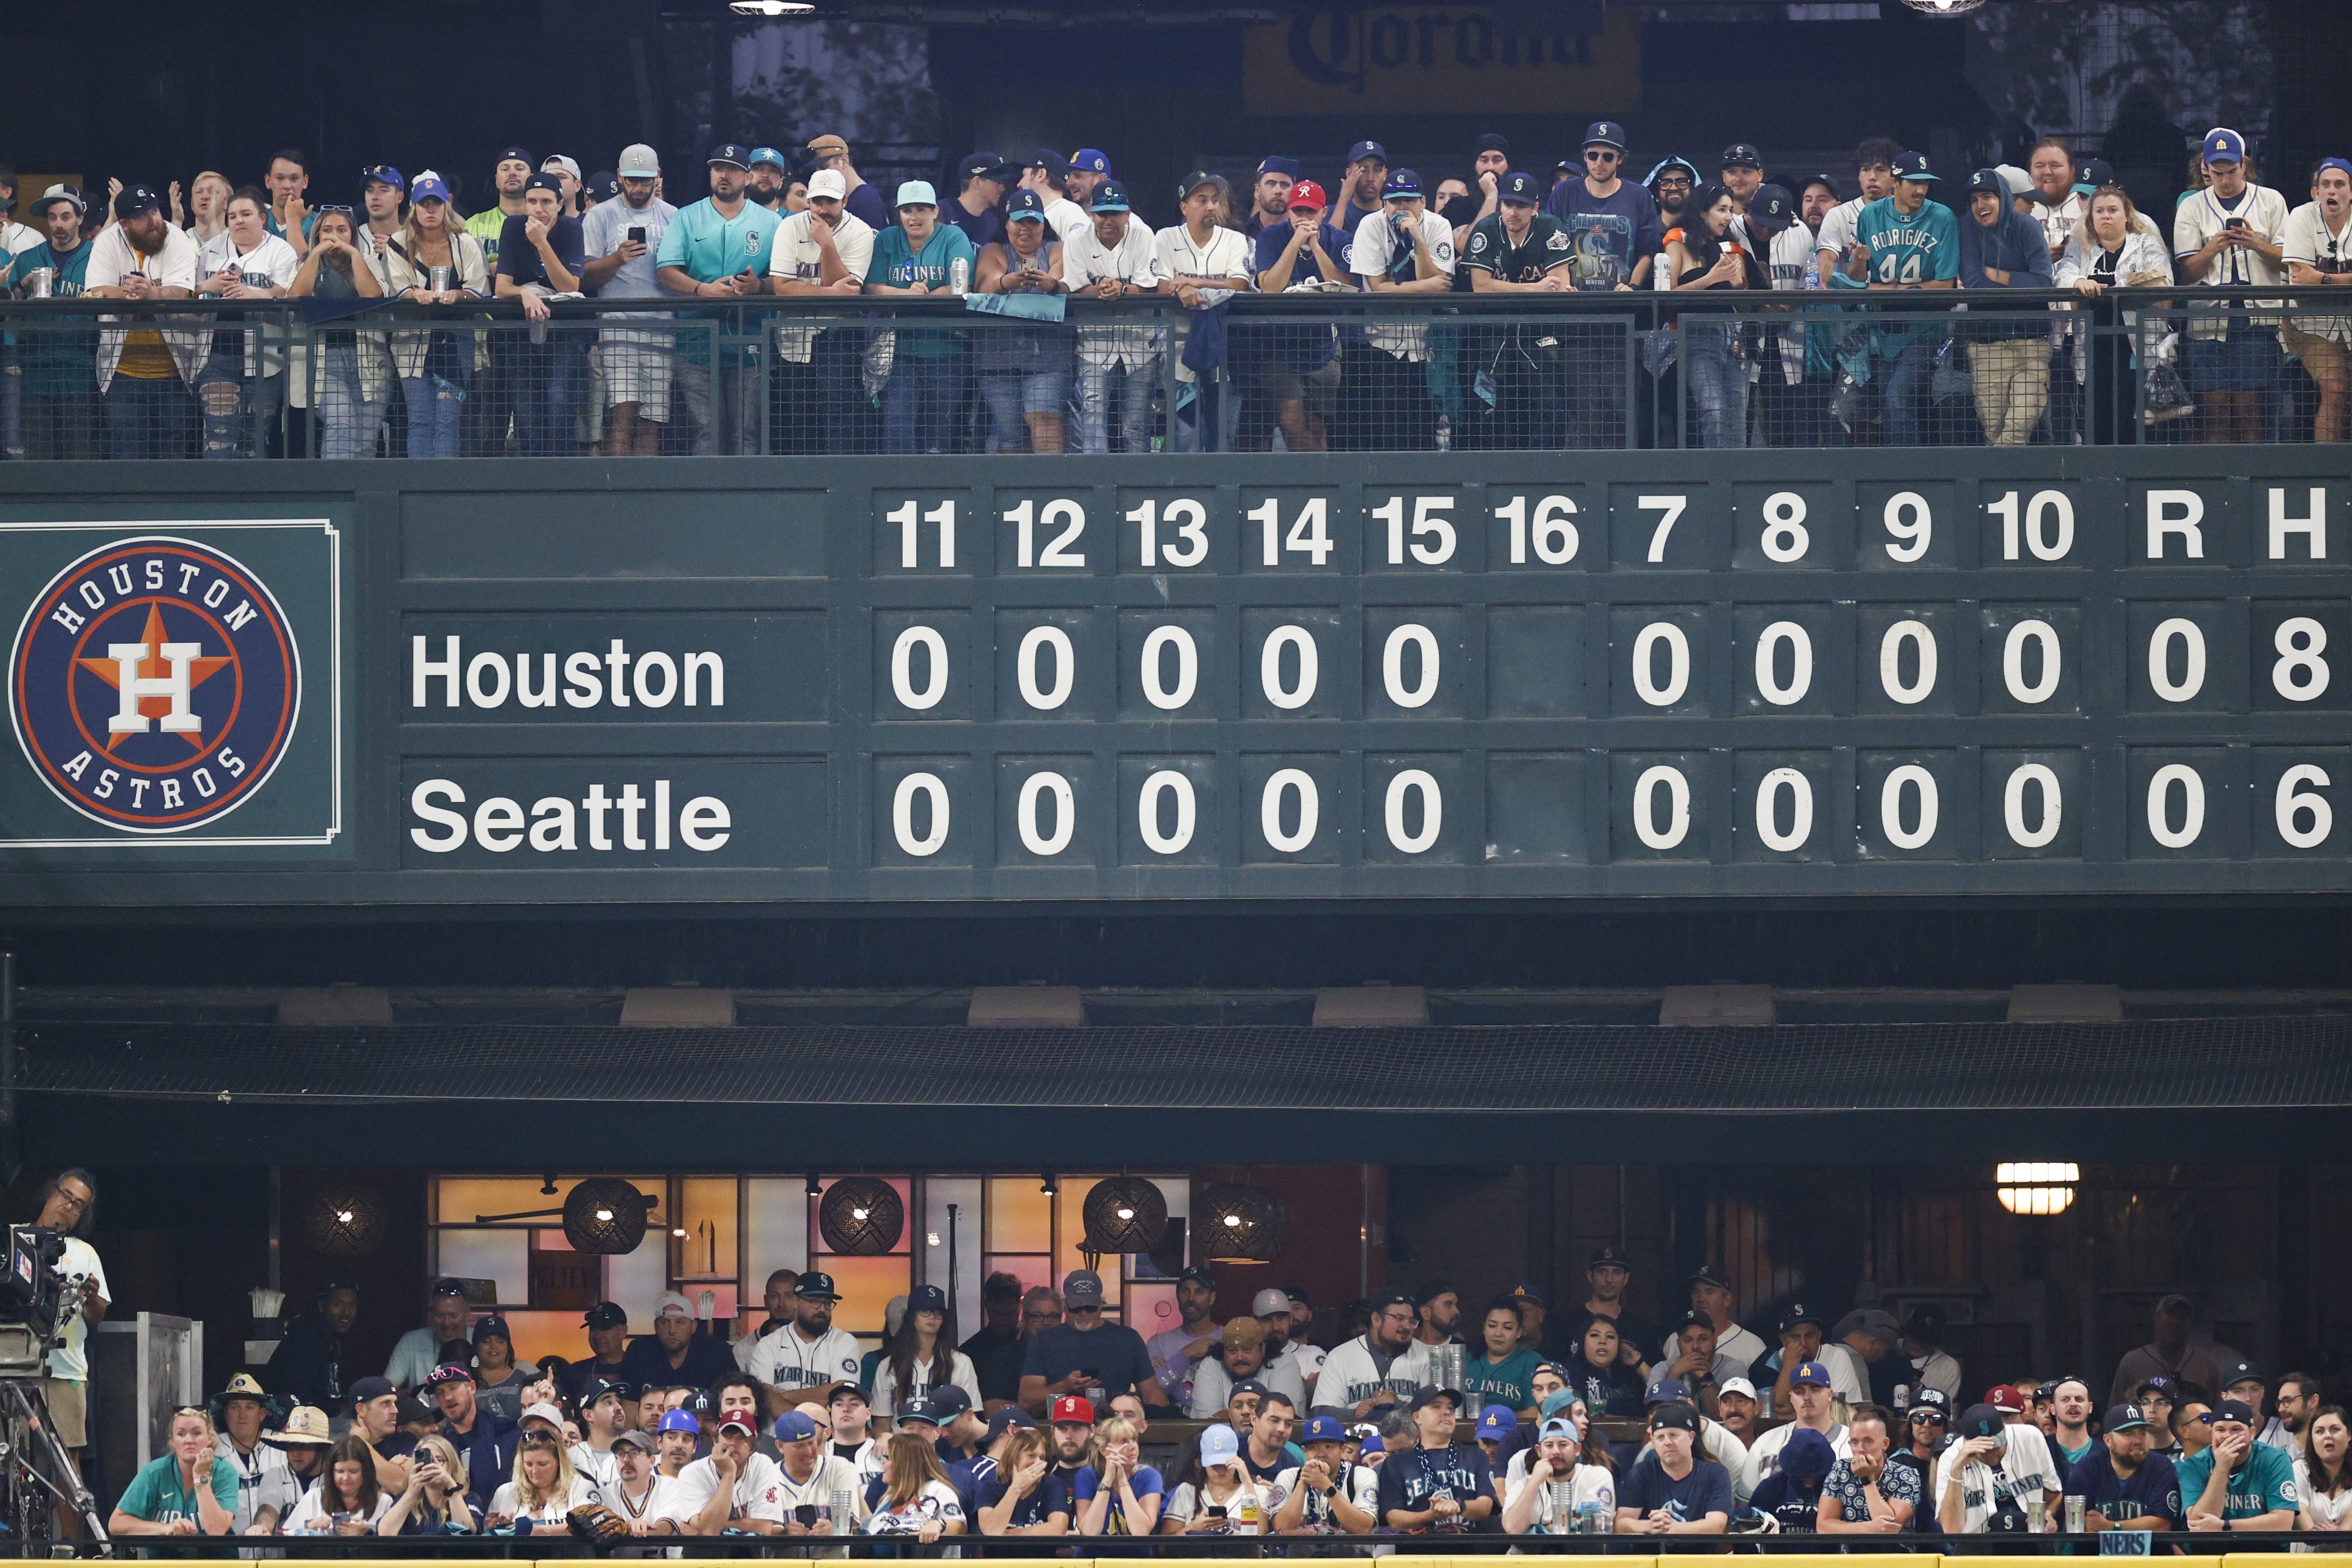 Mariners notes: Seattle opens first homestand with series win over Astros